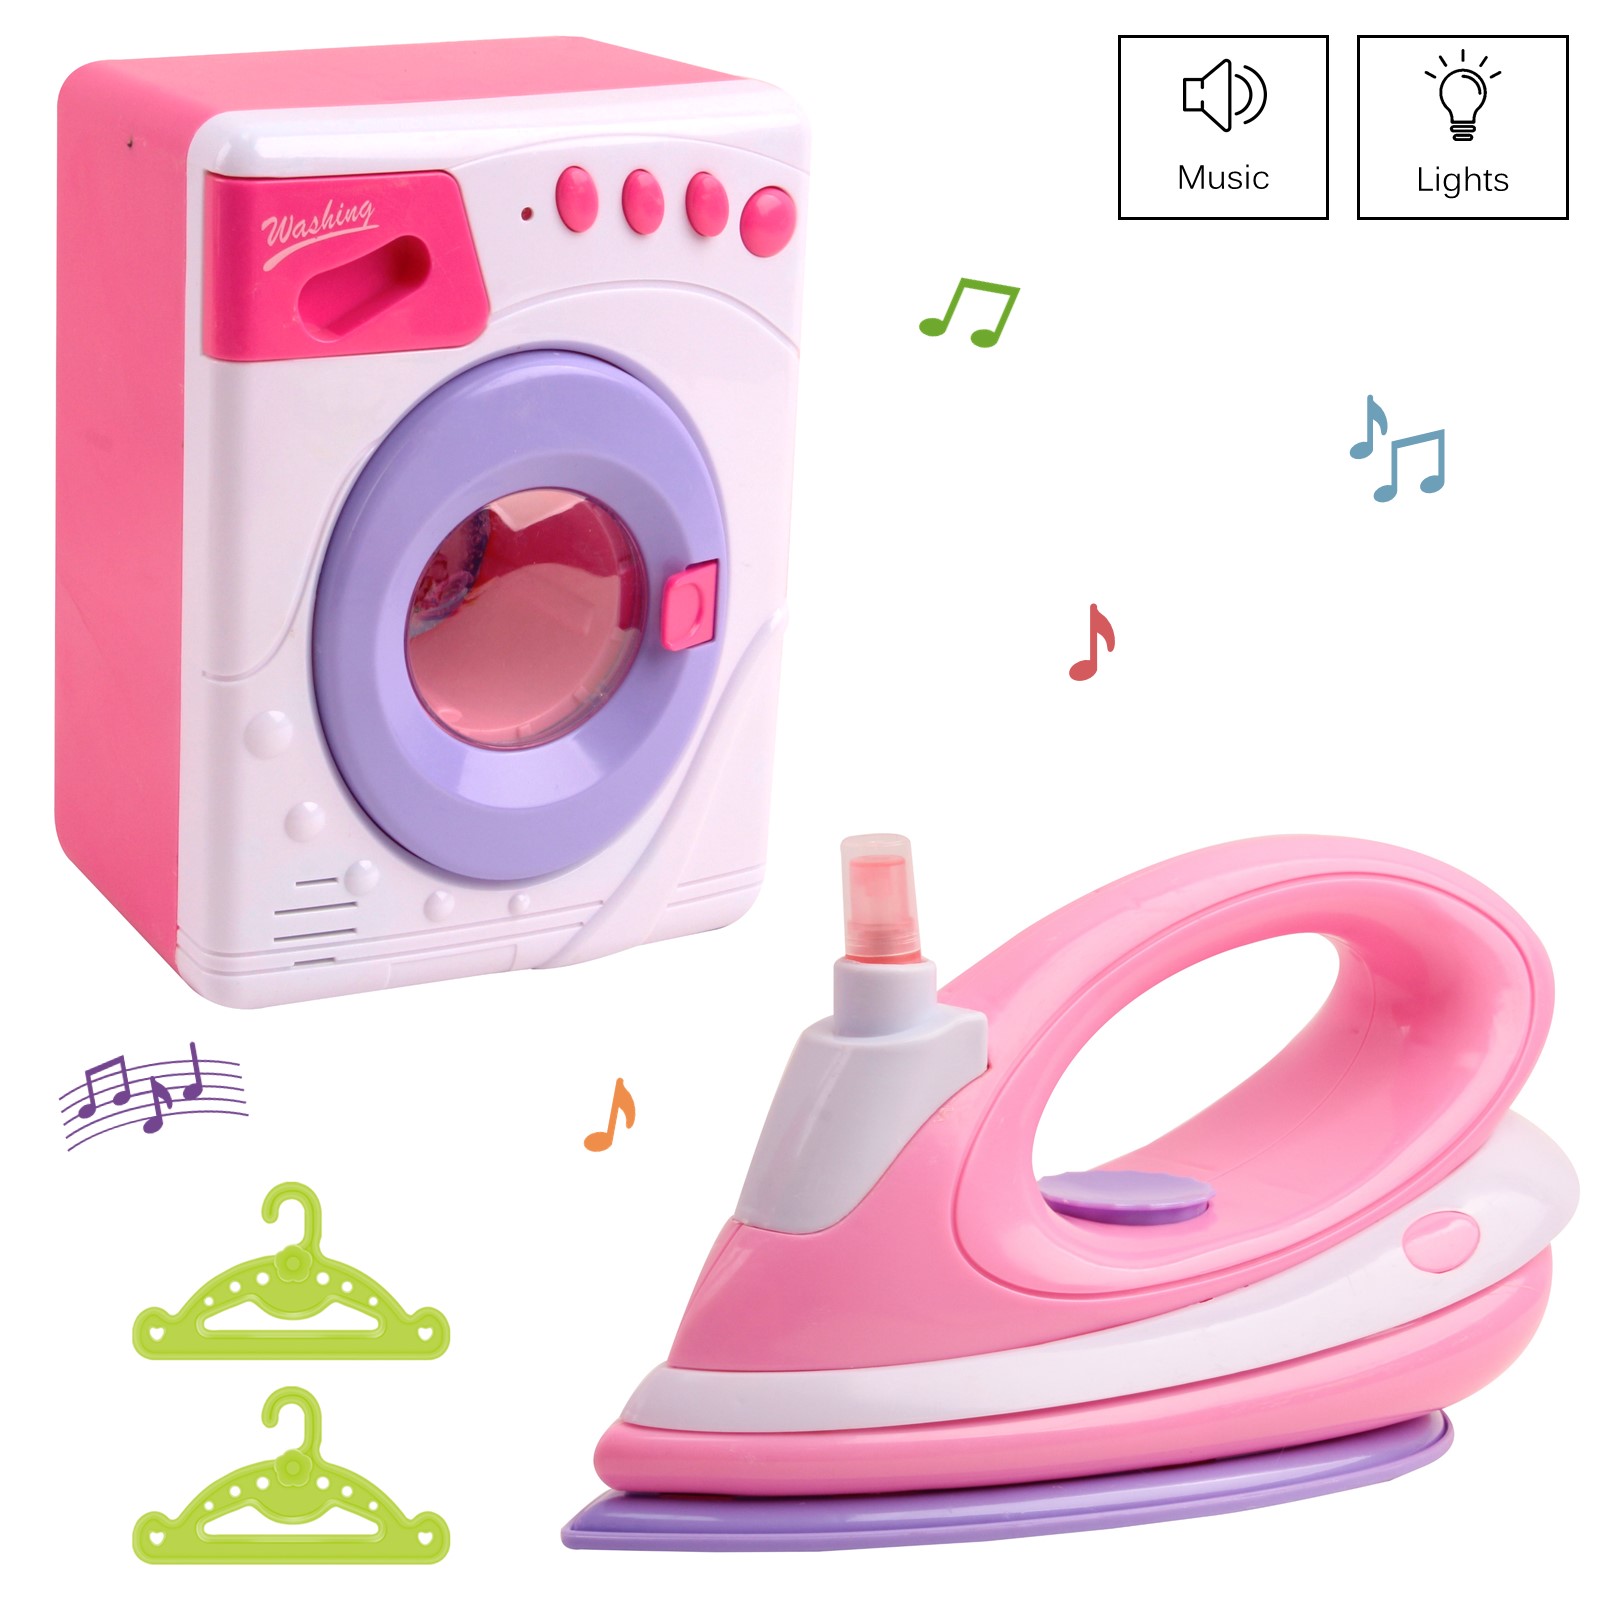 Vokodo Washer And Flatiron Playset With Lights And Music Includes Two Hangers Functional Iron Spray Pretend Play Washing Machine Early Learning Kids Preschool Toy Great Gift For Children Girls Toddler